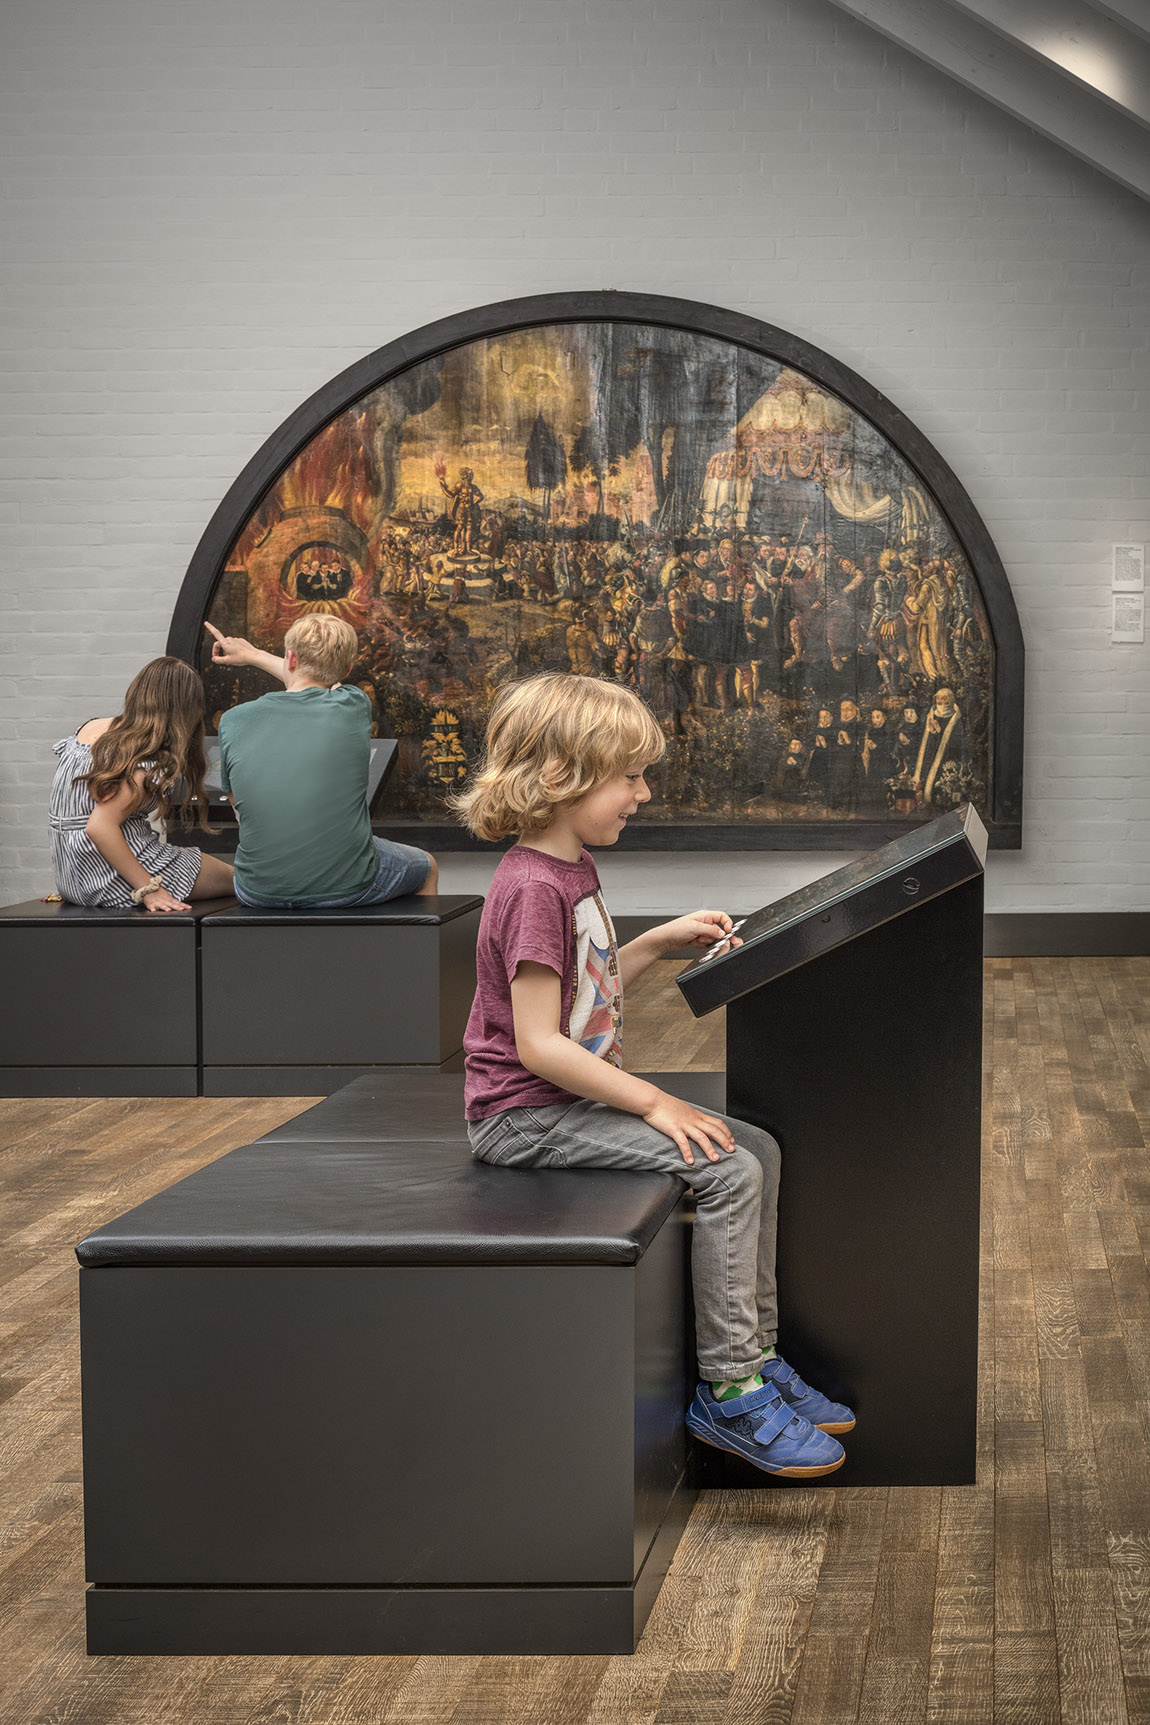 The LutherMuseen: WHERE HISTORY COMES ALIVE